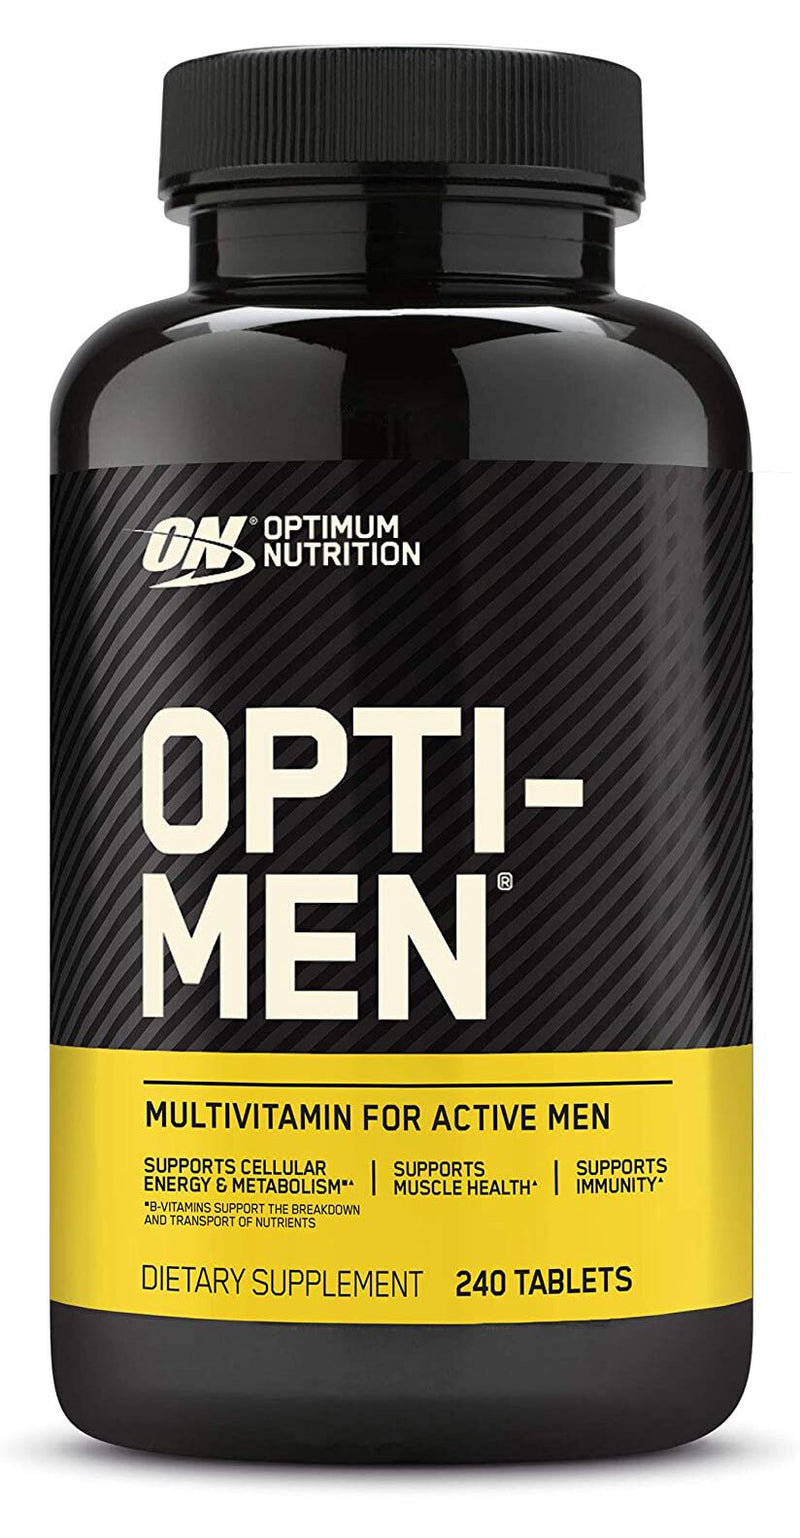 Prominent Sports Nutrition Brand Optimum Nutrition Celebrates Thirty Years